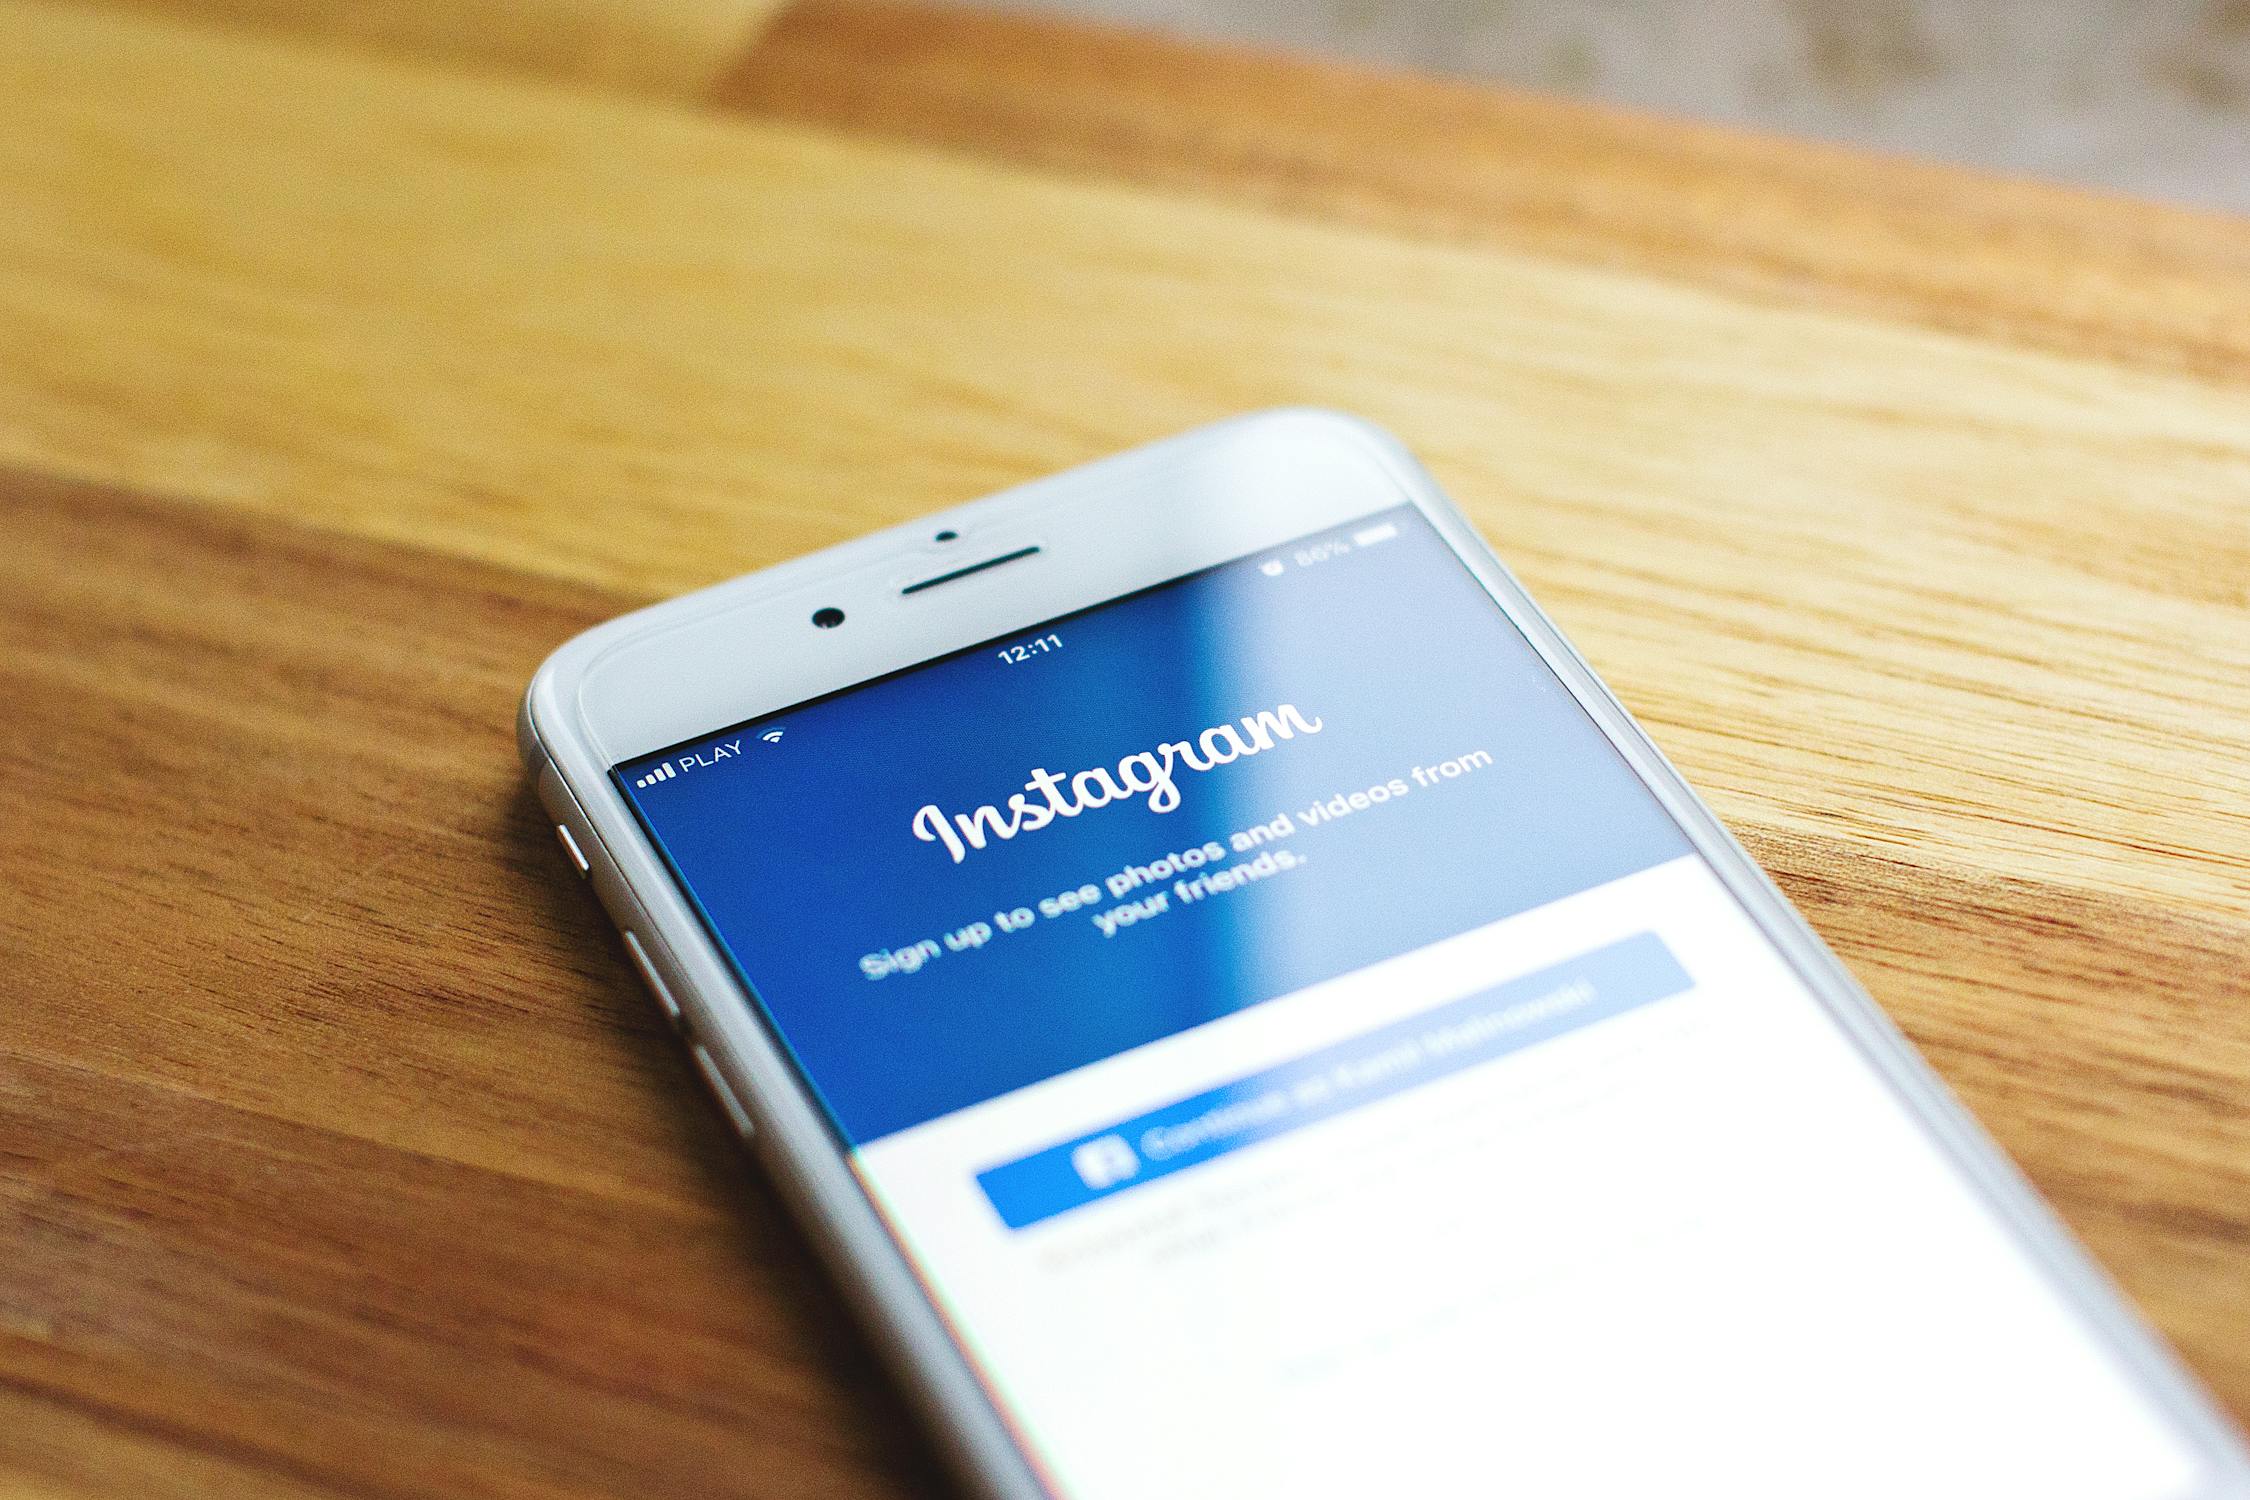 Smartphone on wooden table with Instagram loading screen displayed pros and cons of Instagram